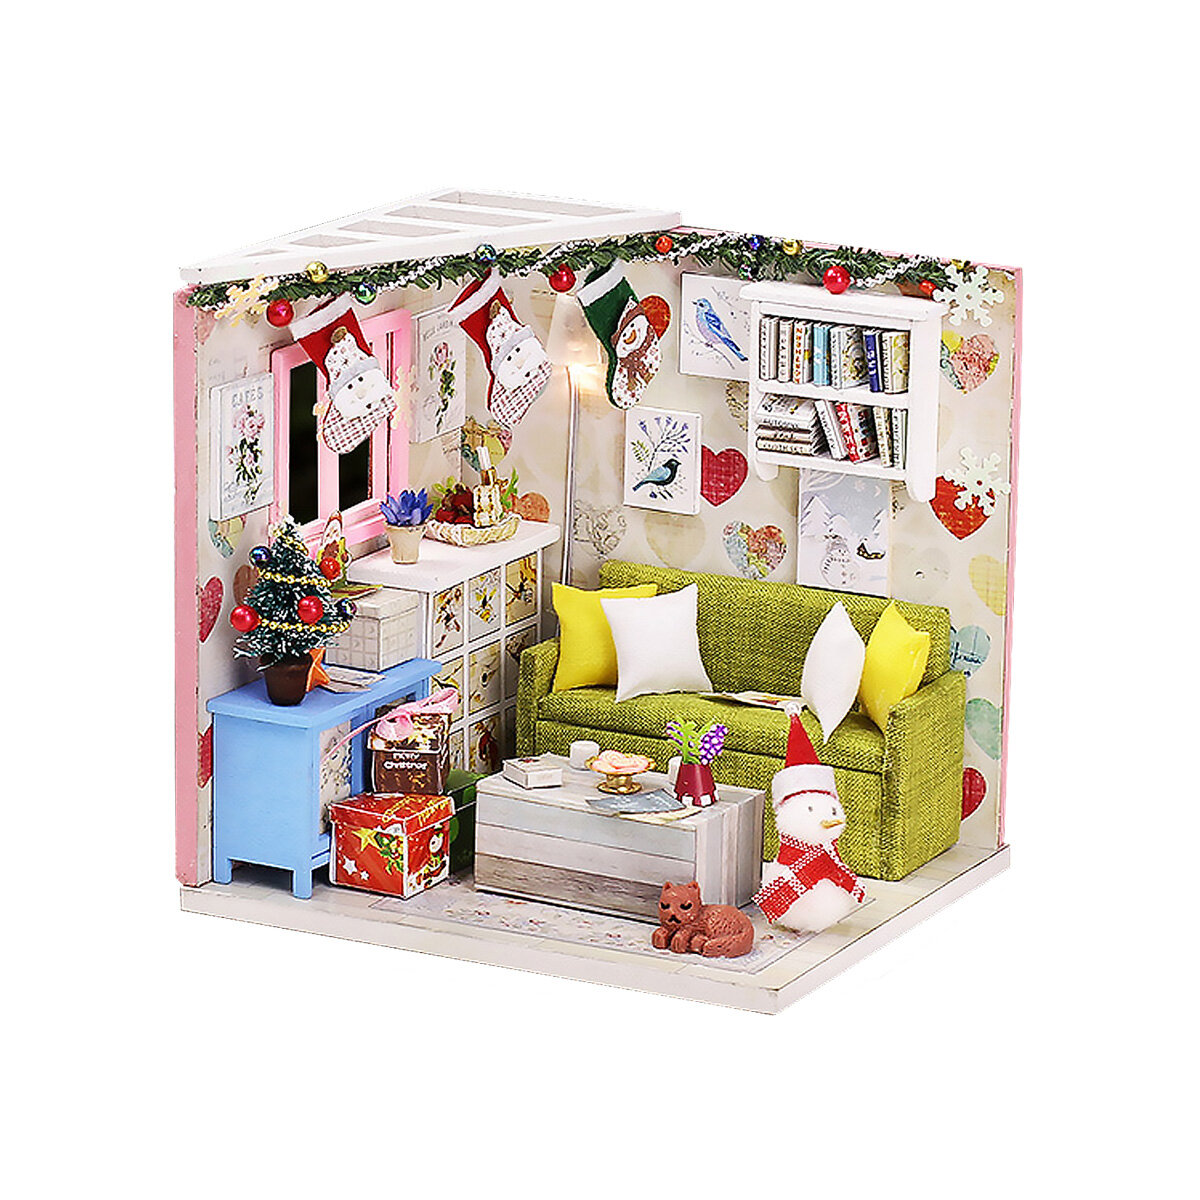 

Wooden Living Room DIY Handmade Assemble Doll House Miniature Furniture Kit Education Toy with LED Light for Collection